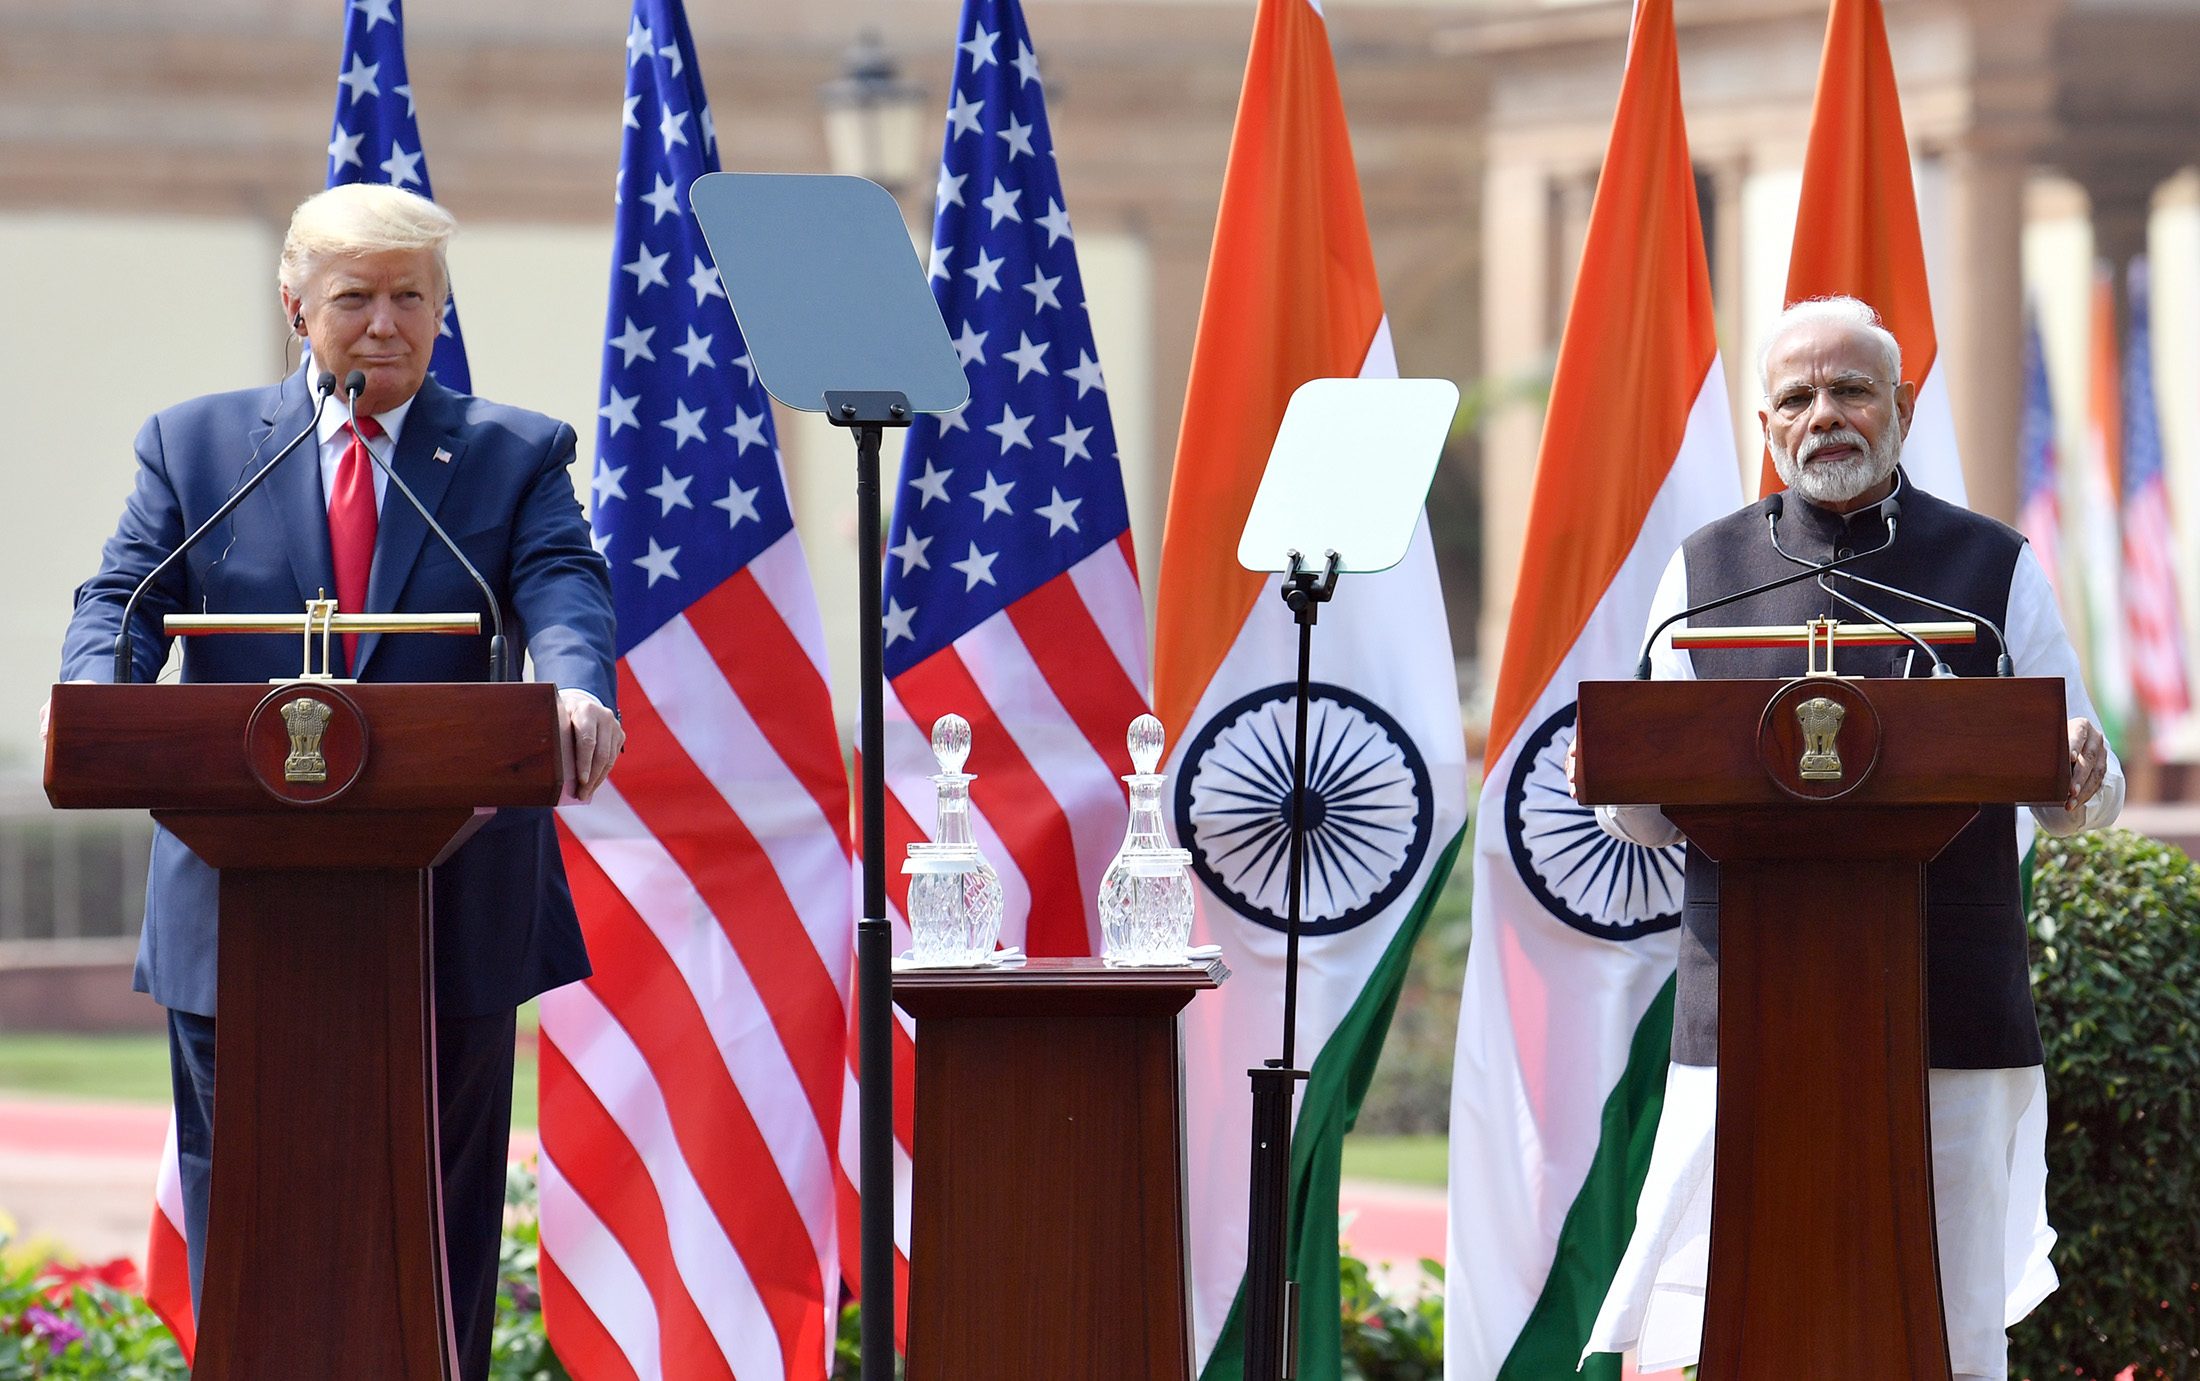 The Prime Minister, Shri Narendra Modi with the President of United States of America (USA), Mr. Donald Trump at the Joint Press Statements, at Hyderabad House, in New Delhi on February 25, 2020.